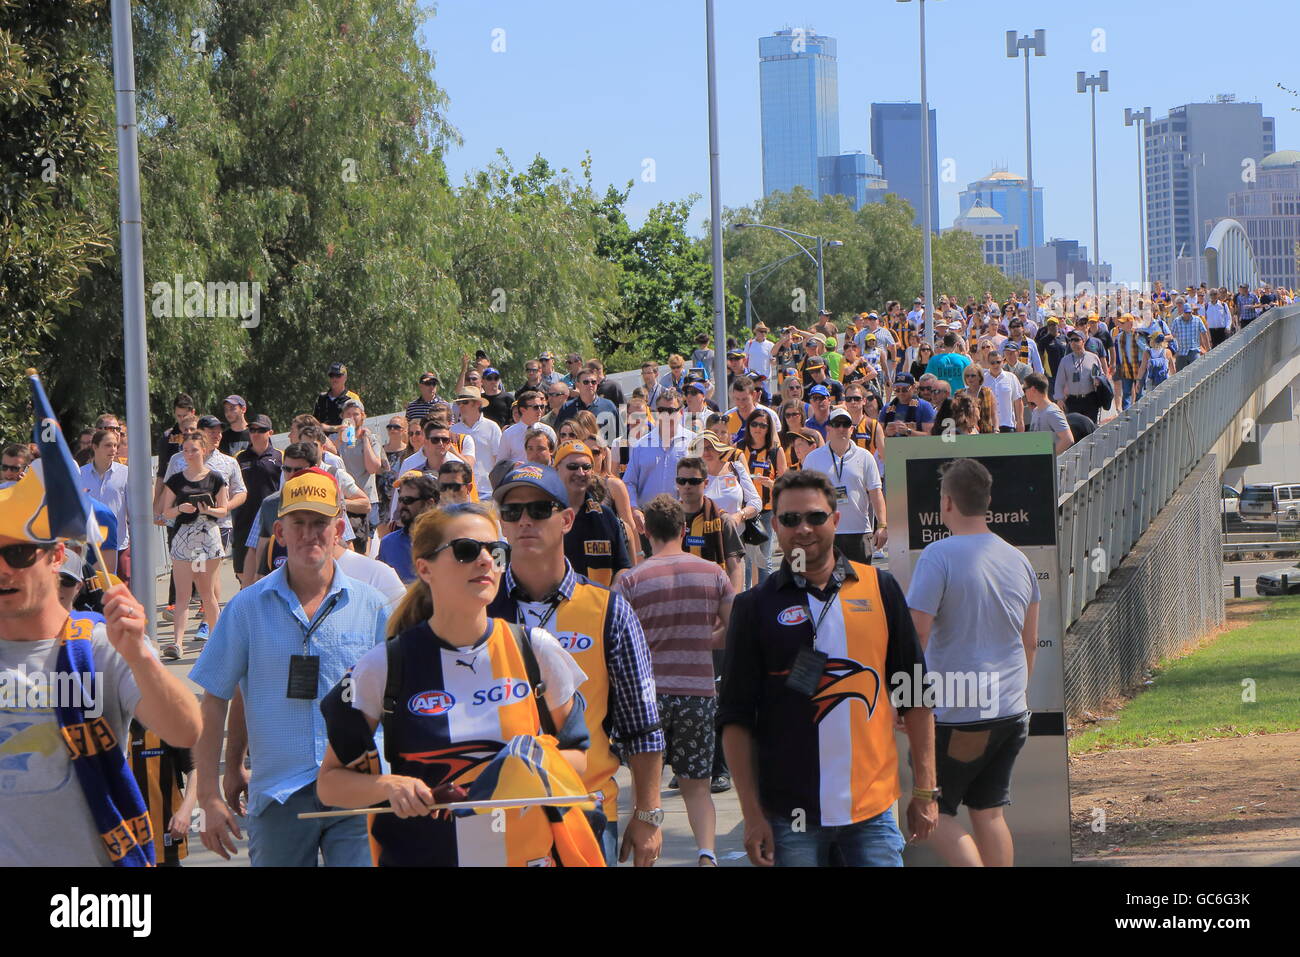 People visit MCG for AFL ground final game in Melbourne Australia. Stock Photo